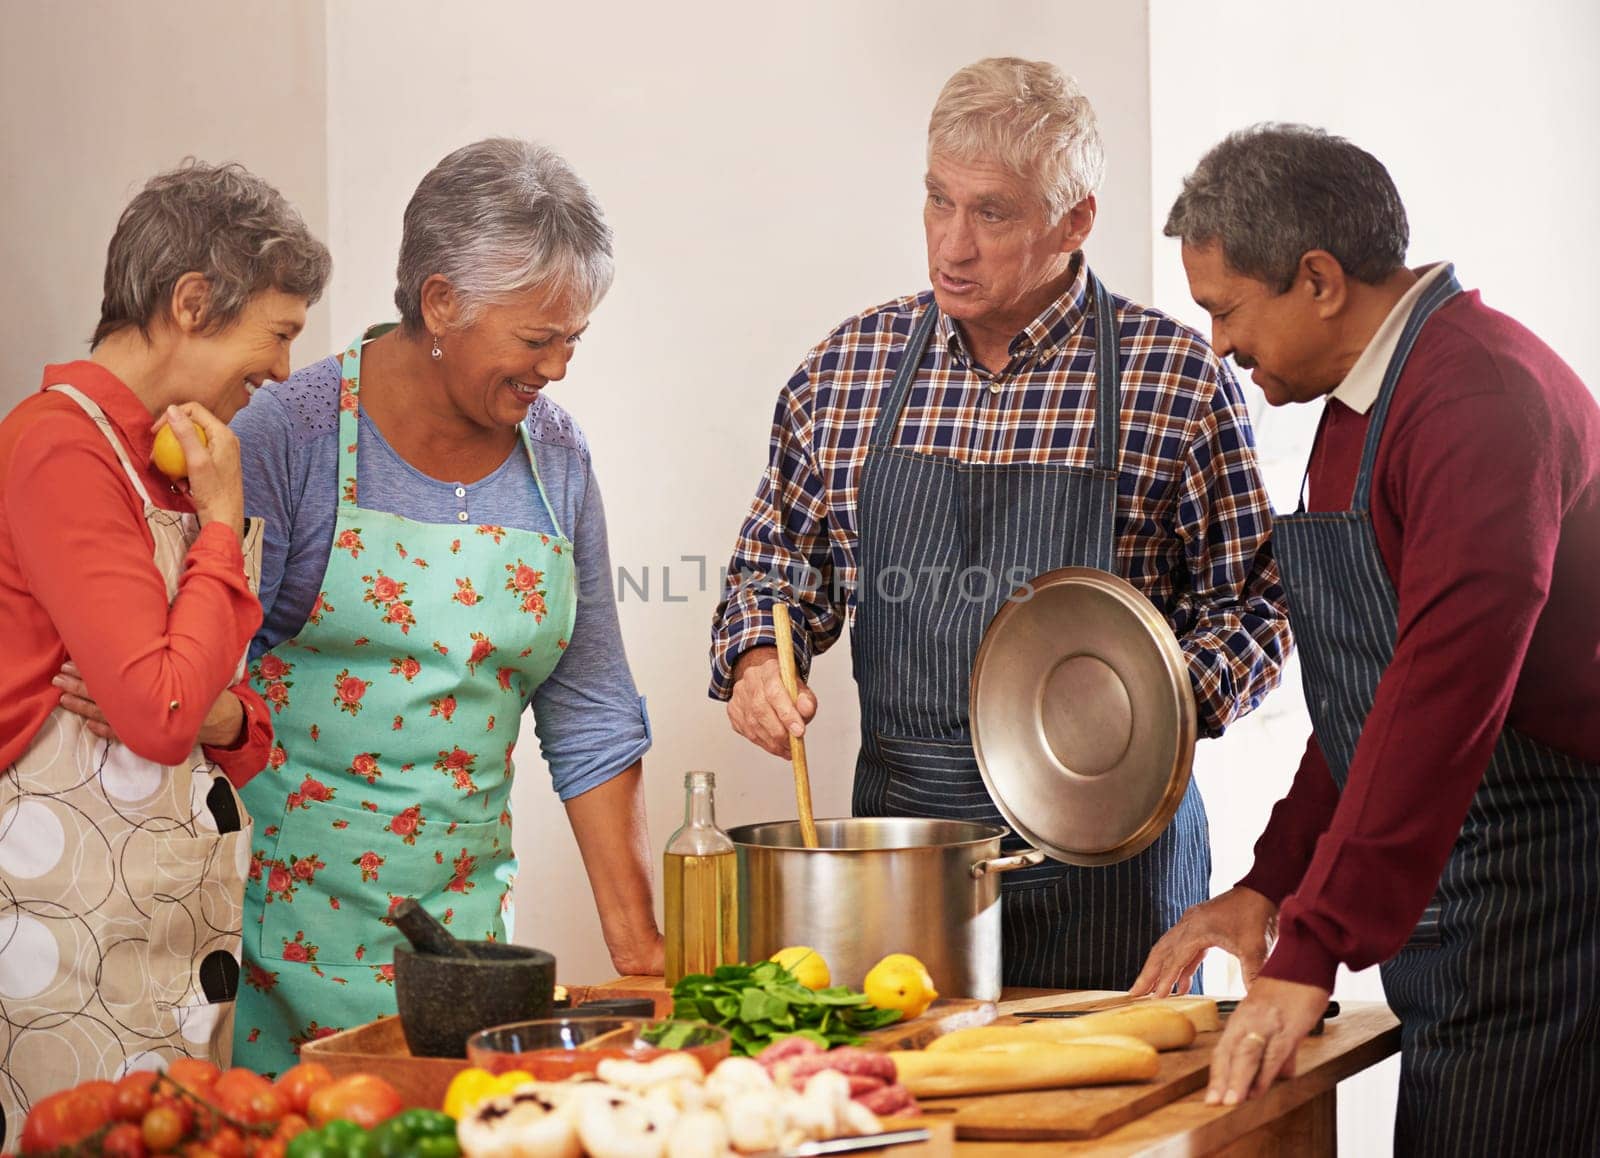 Cooking class, chef or senior friends in kitchen for fun, bonding or meal prep for reunion, birthday or weekend dish in house. Diet, nutrition or old people learning traditional food, pasta or recipe by YuriArcurs